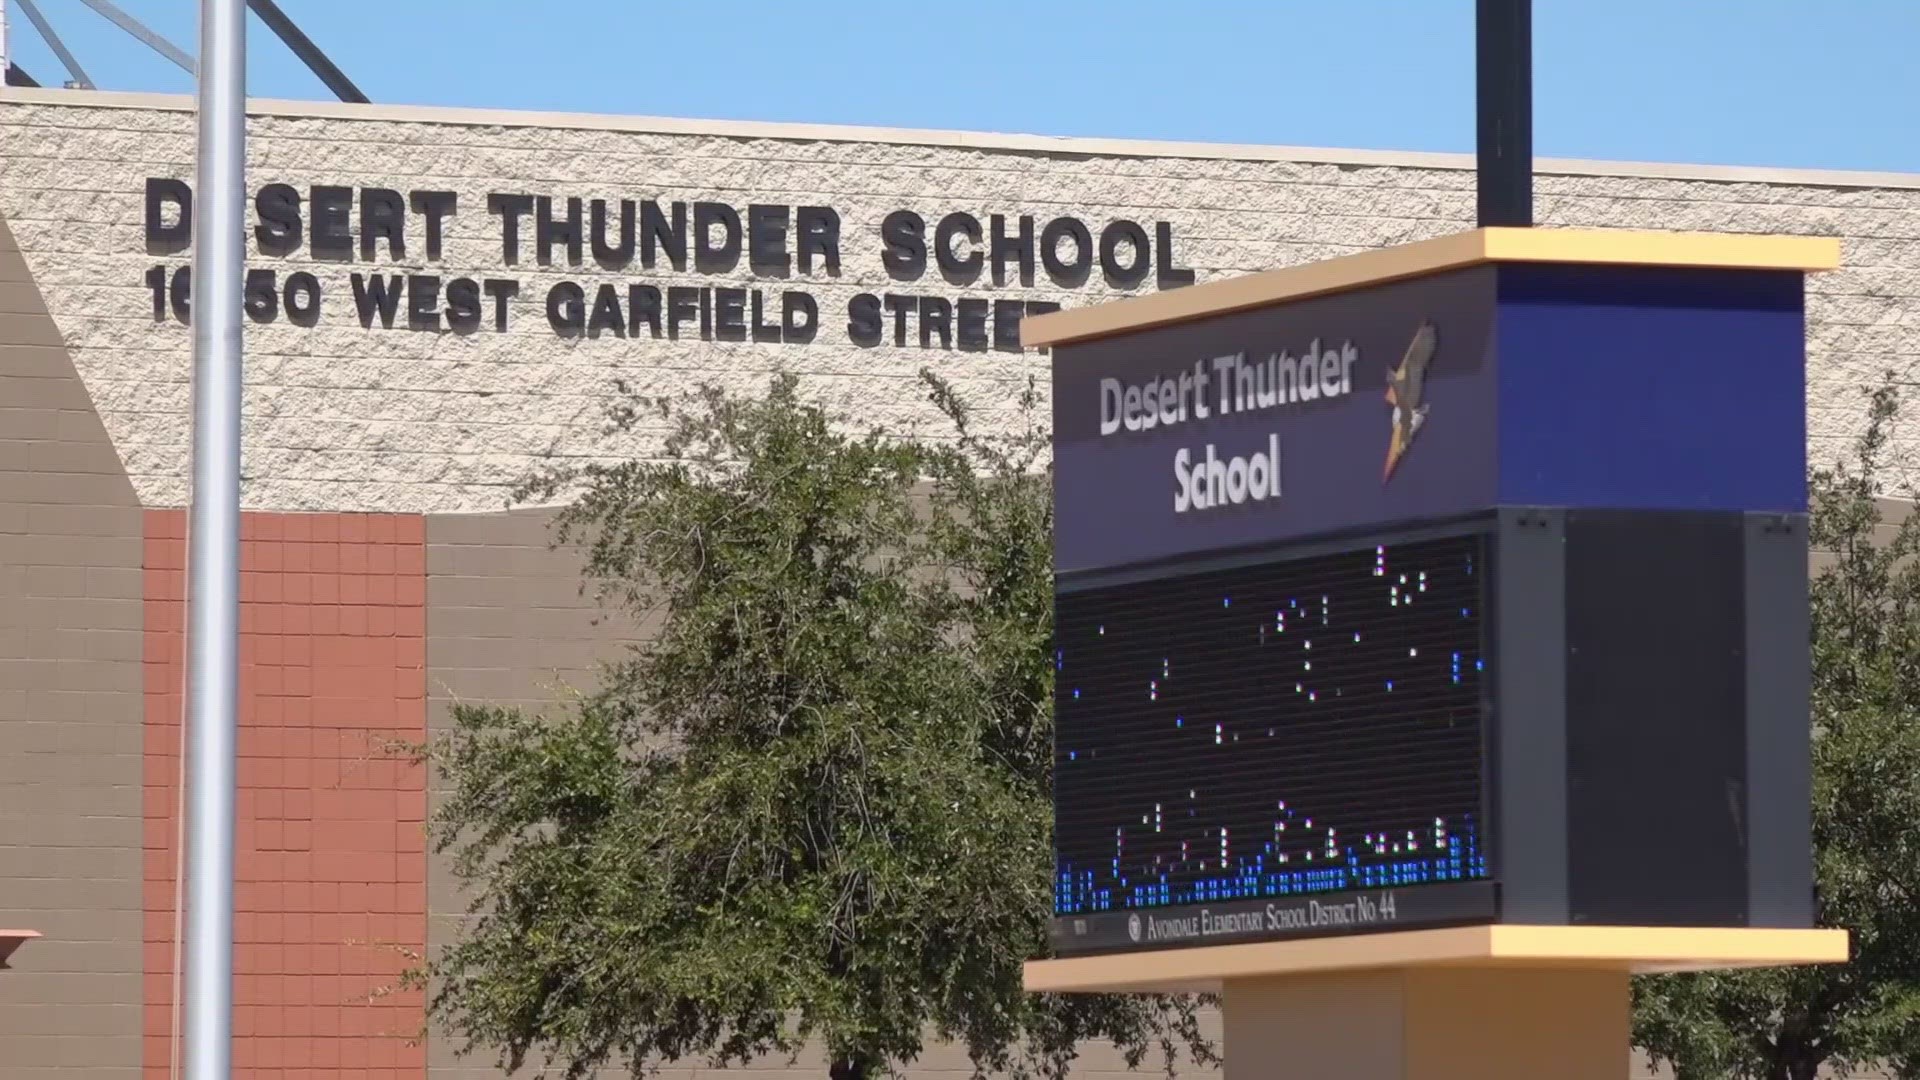 A student reported seeing a threat made on social media against Desert Thunder Elementary School, which prompted Goodyear police to start investigating.